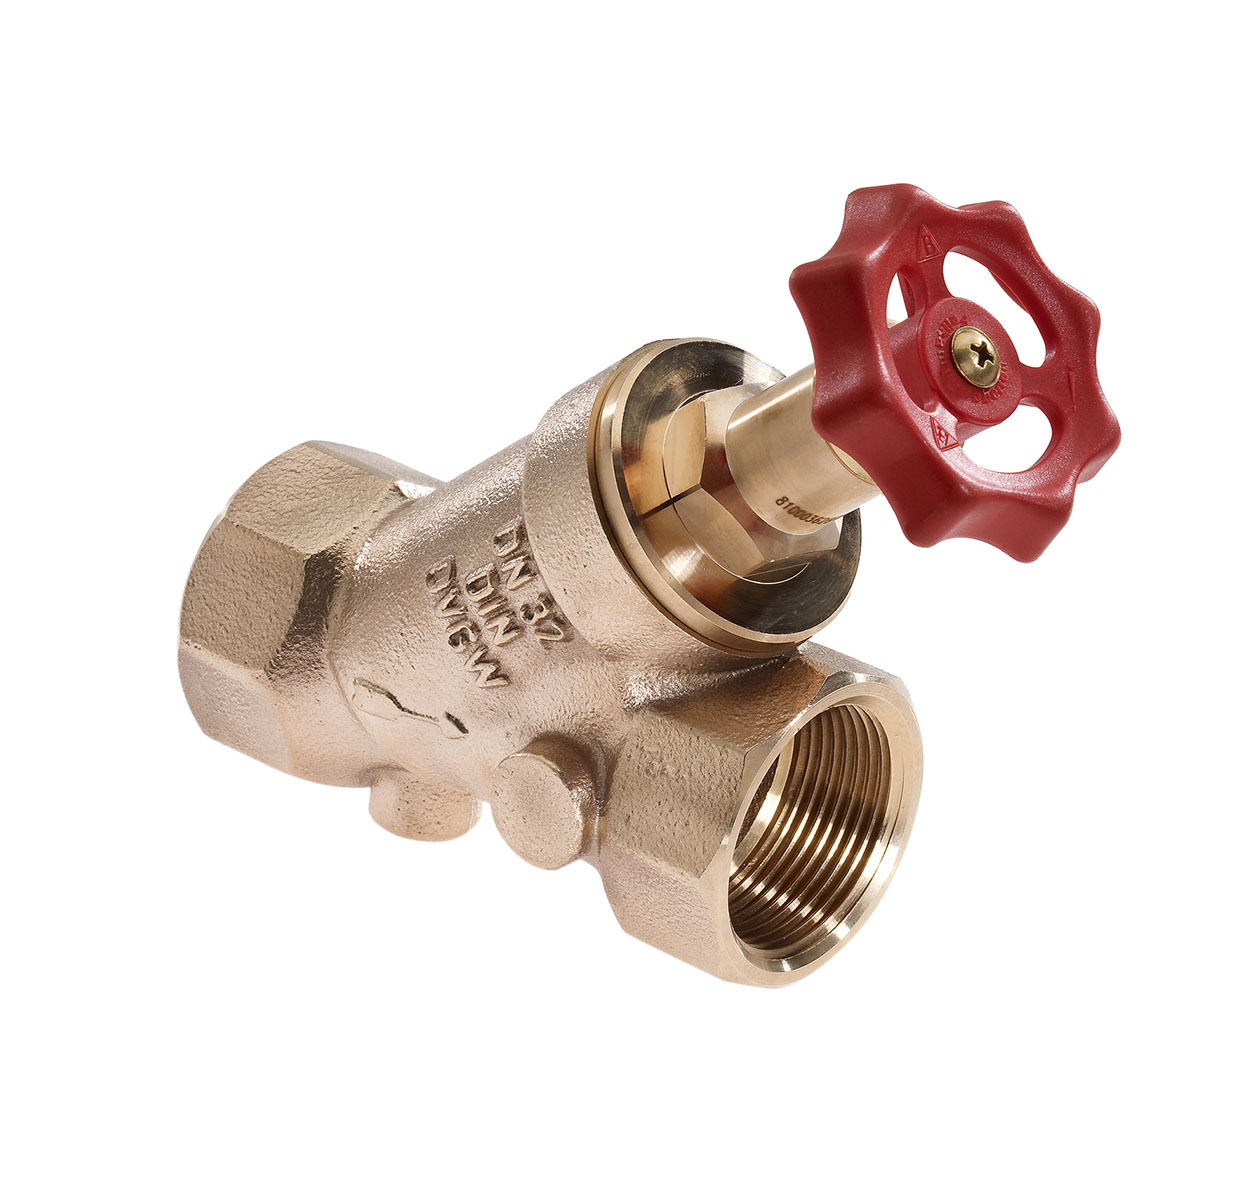 3501320 - Red-brass Free-flow valve female thread, without drain valve